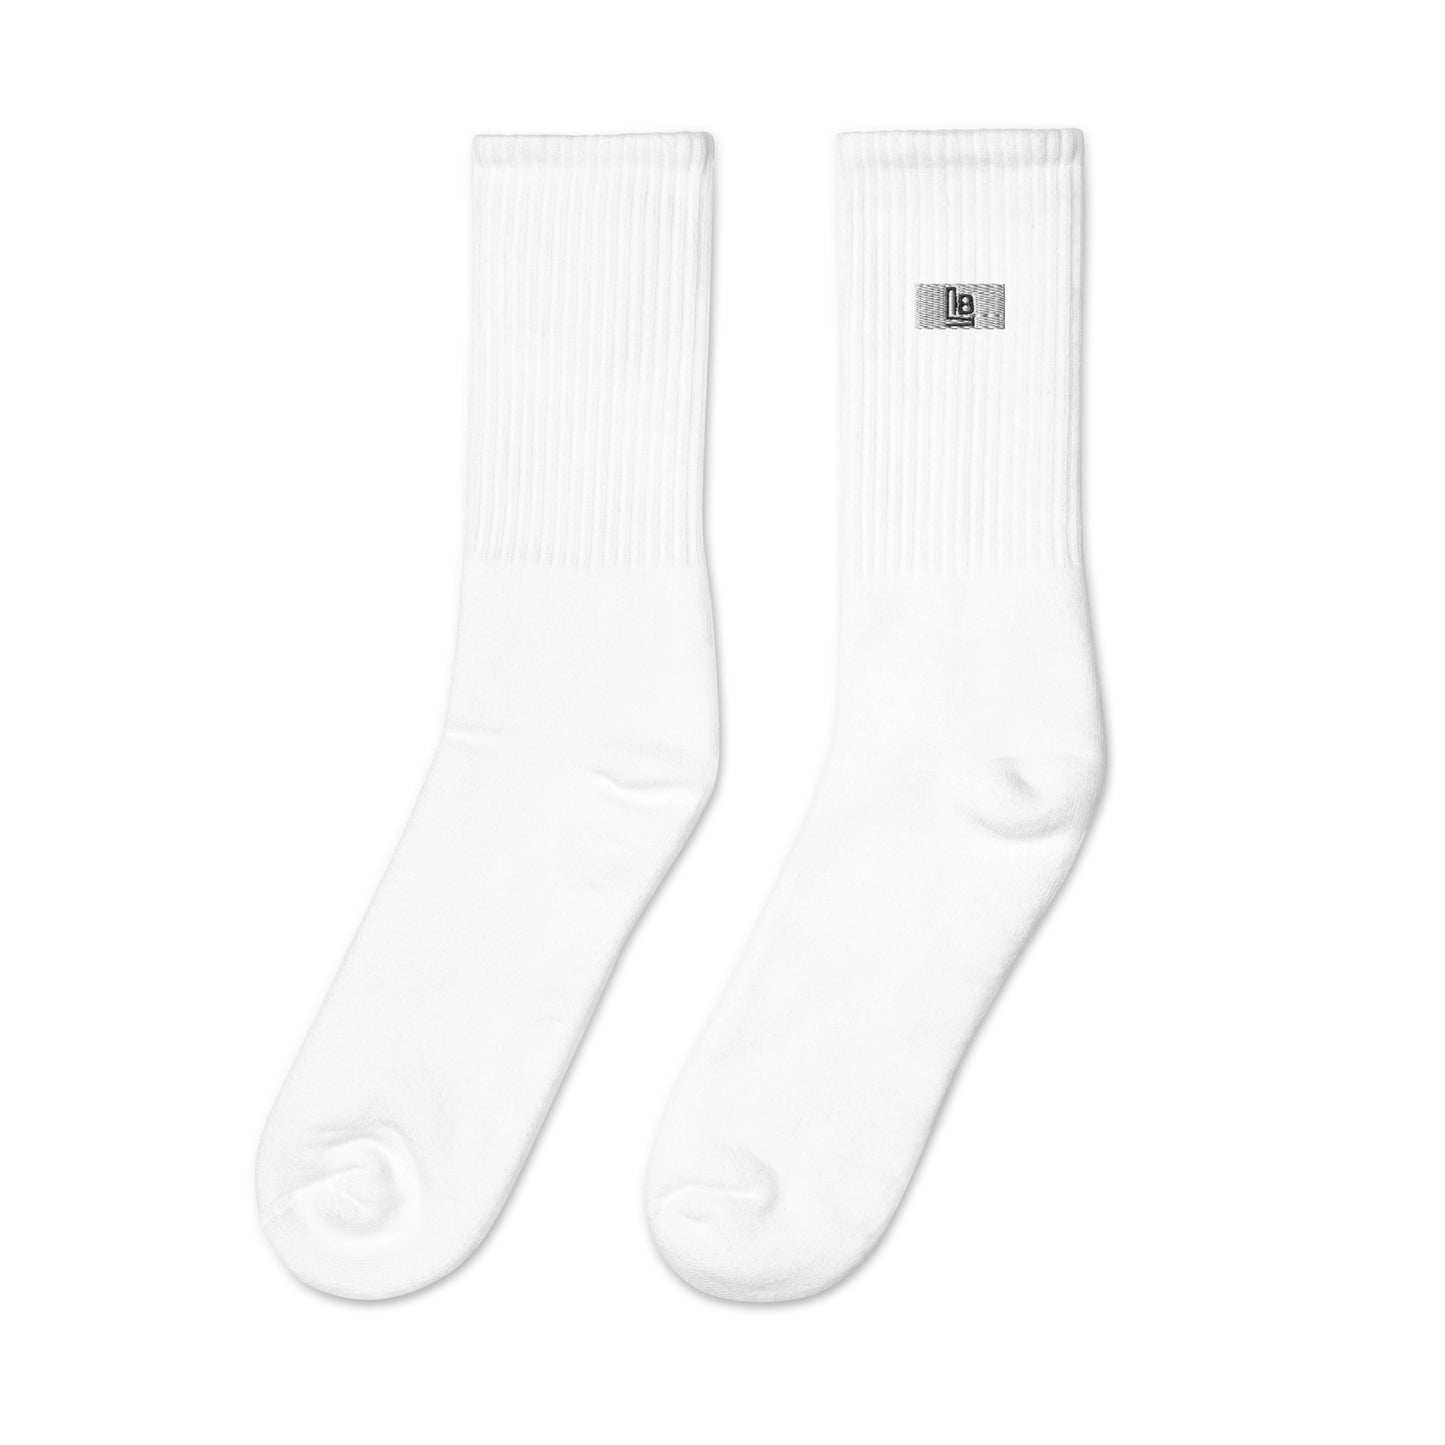 Embroidered socks lb type 2